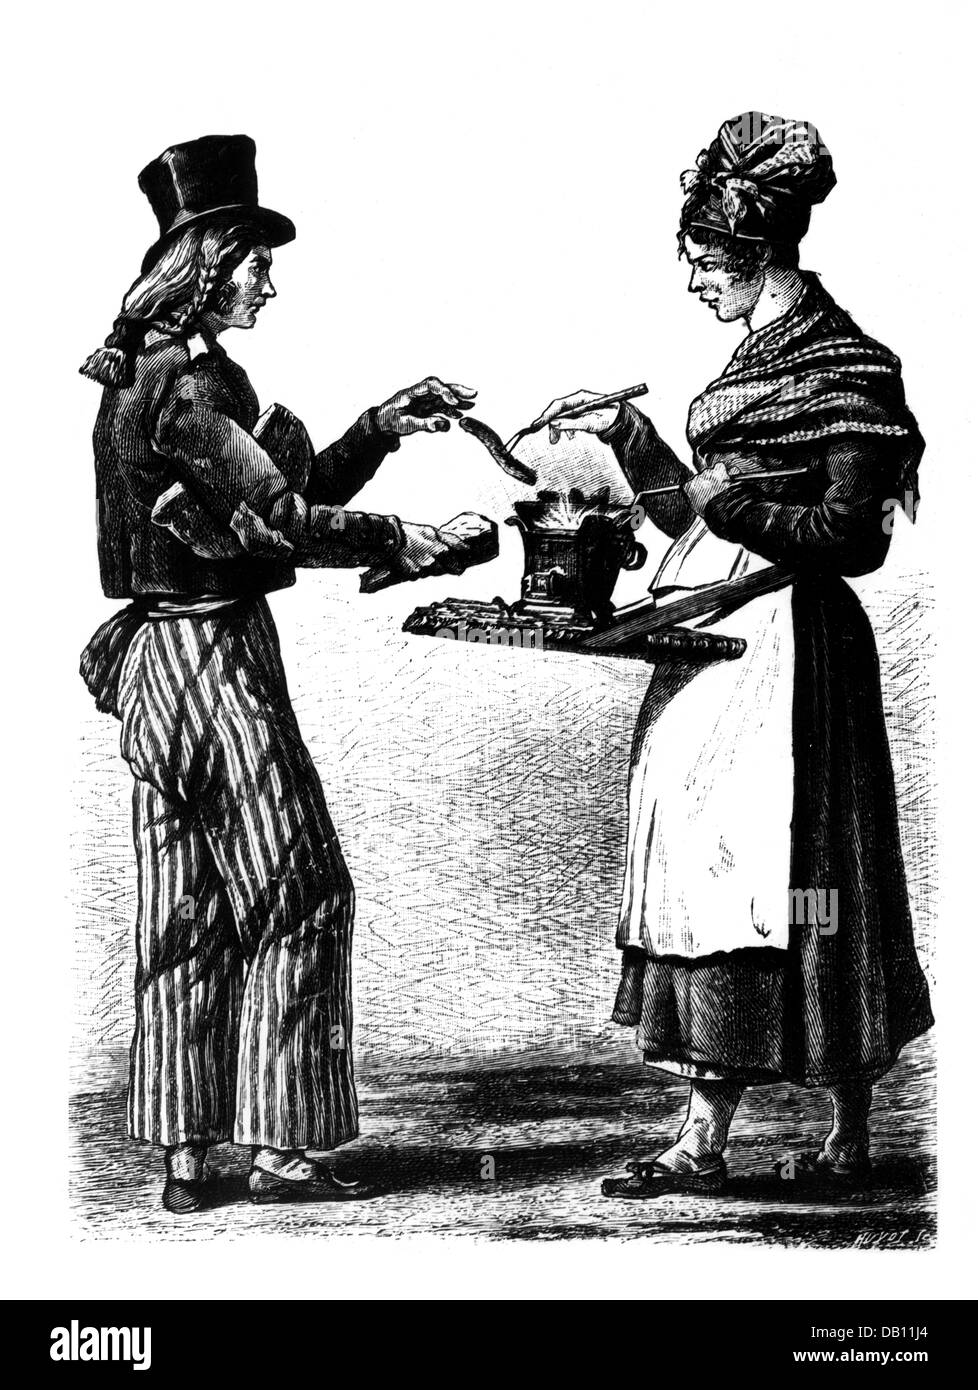 trade,merchant,female vendor of sausages,after Charles Vernet(1758 - 1836),18th century,wood engraving,by Huyot,19th century,18th century,graphic,graphics,France,Directoire,profession,professions,merchants,vendor,vender,vendors,venders,saleswoman,saleswomen,salesladies,merchant,full length,standing,carrying,carry,vendor's tray,vendor's trays,bangers,clothes,outfit,outfits,bonnet,bonnets,dress,dresses,apron,aprons,buyer,tophat,top hat,tophats,top-hat,topper,high hat,top-hats,toppers,high hats,foodstuff,victuals,Additional-Rights-Clearences-Not Available Stock Photo